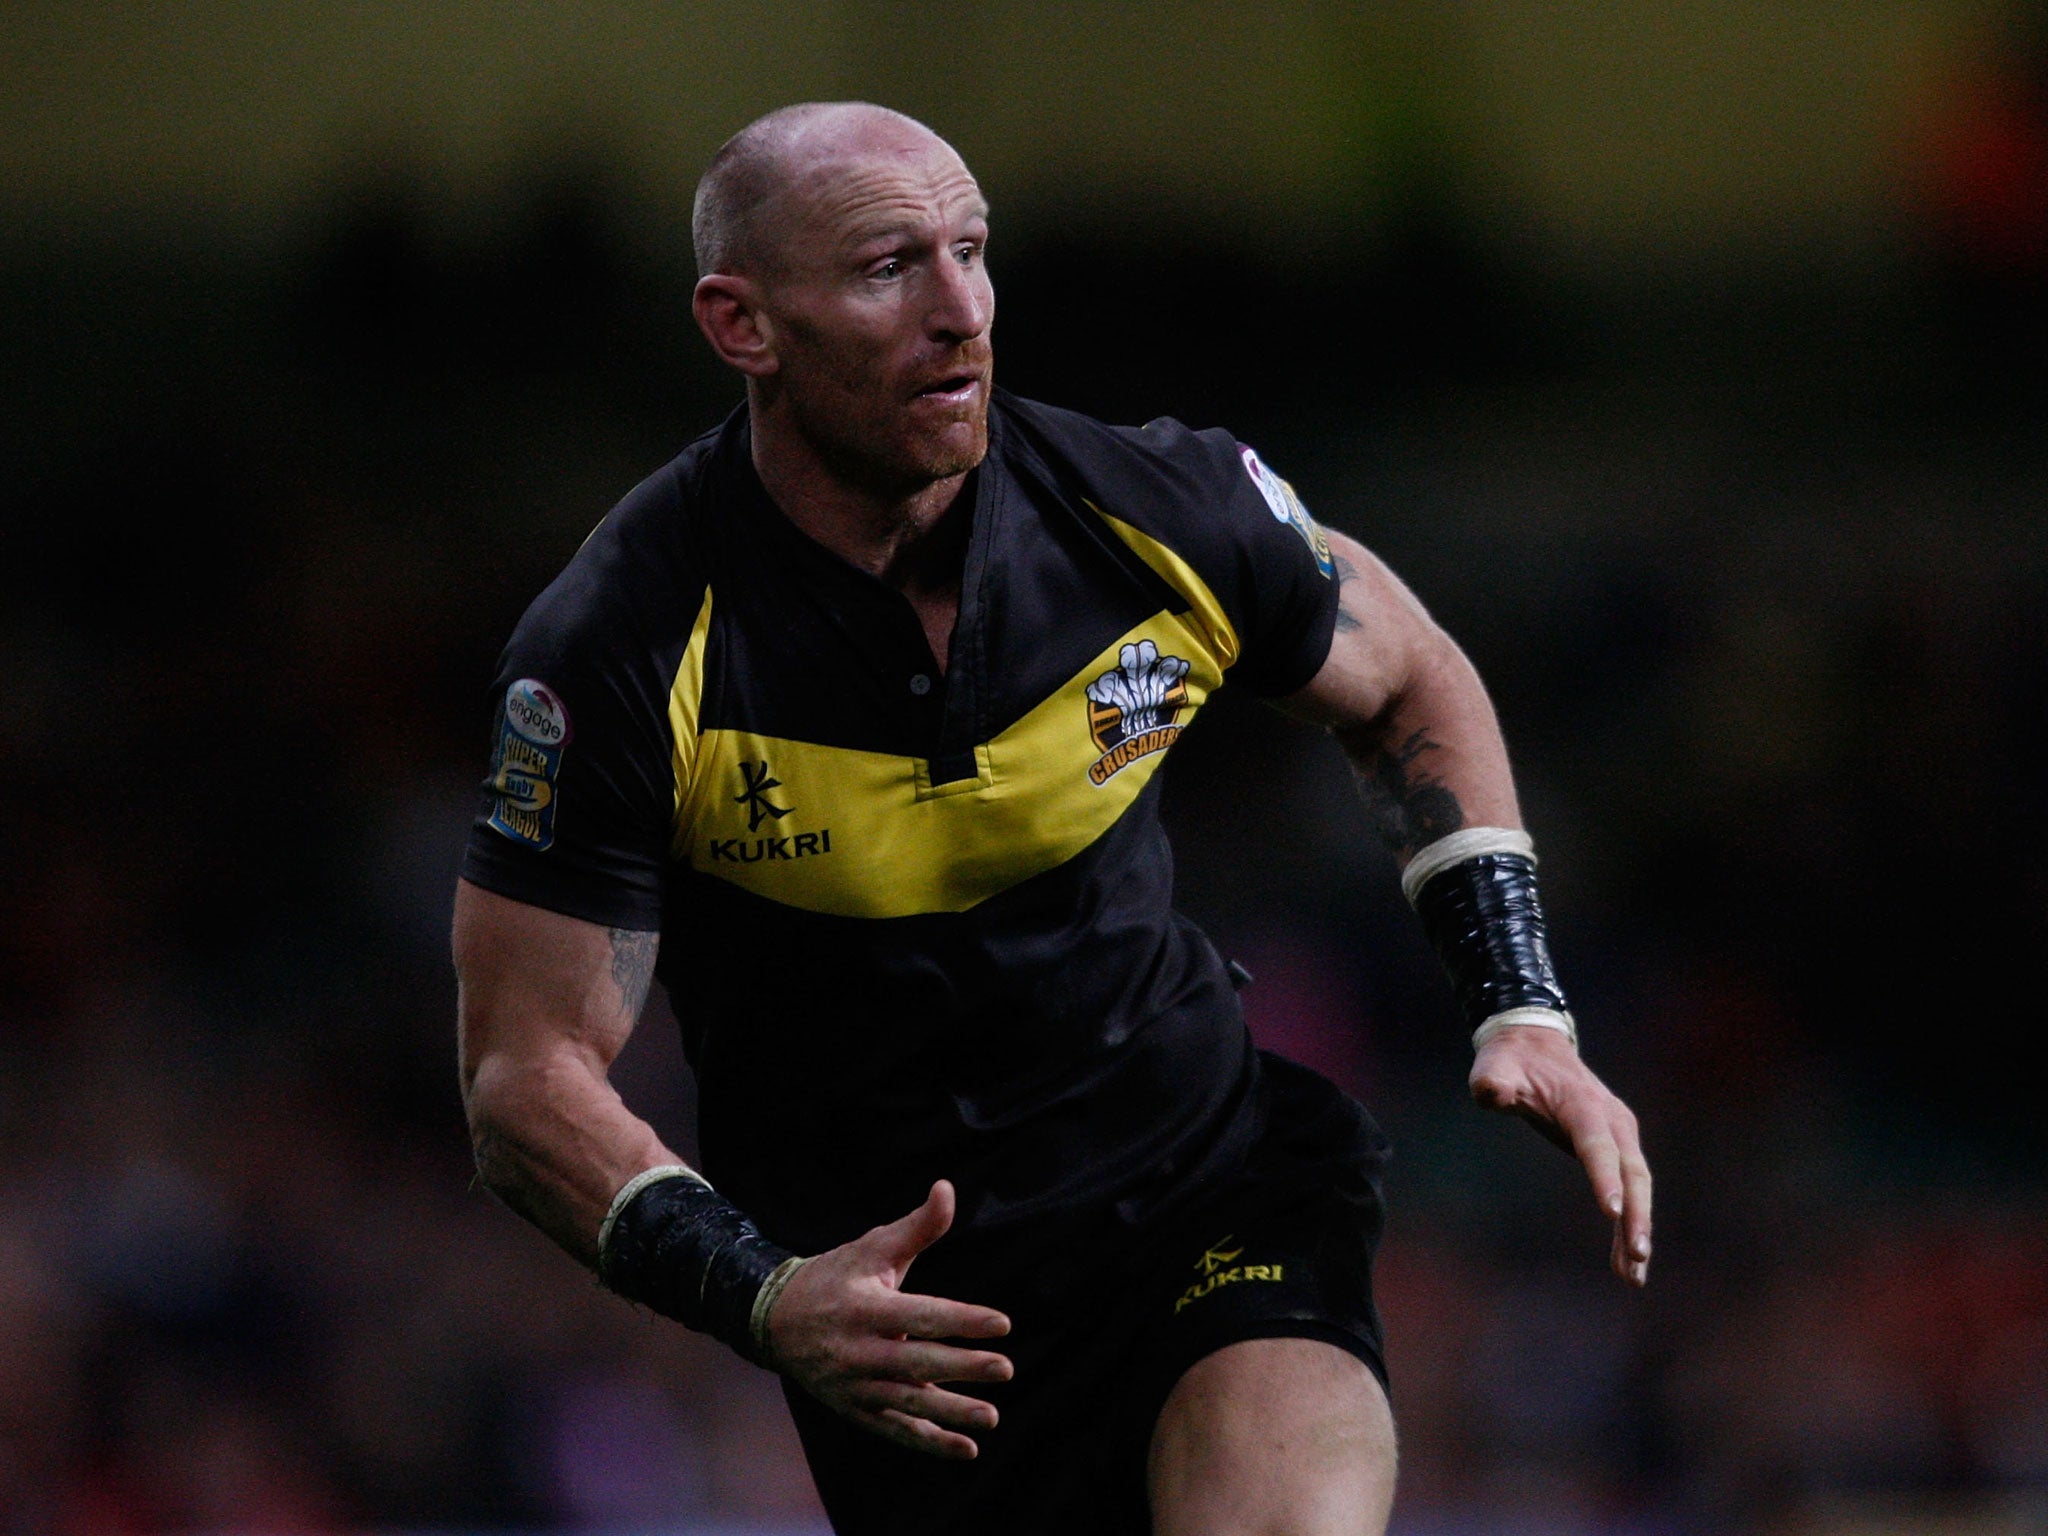 Former Wales and Lions captain, Gareth Thomas, broke rugby taboo by revealing he was gay in a 2009 Daily Mail interview, saying: 'I don't want to be known as a gay rugby player.' (Getty)